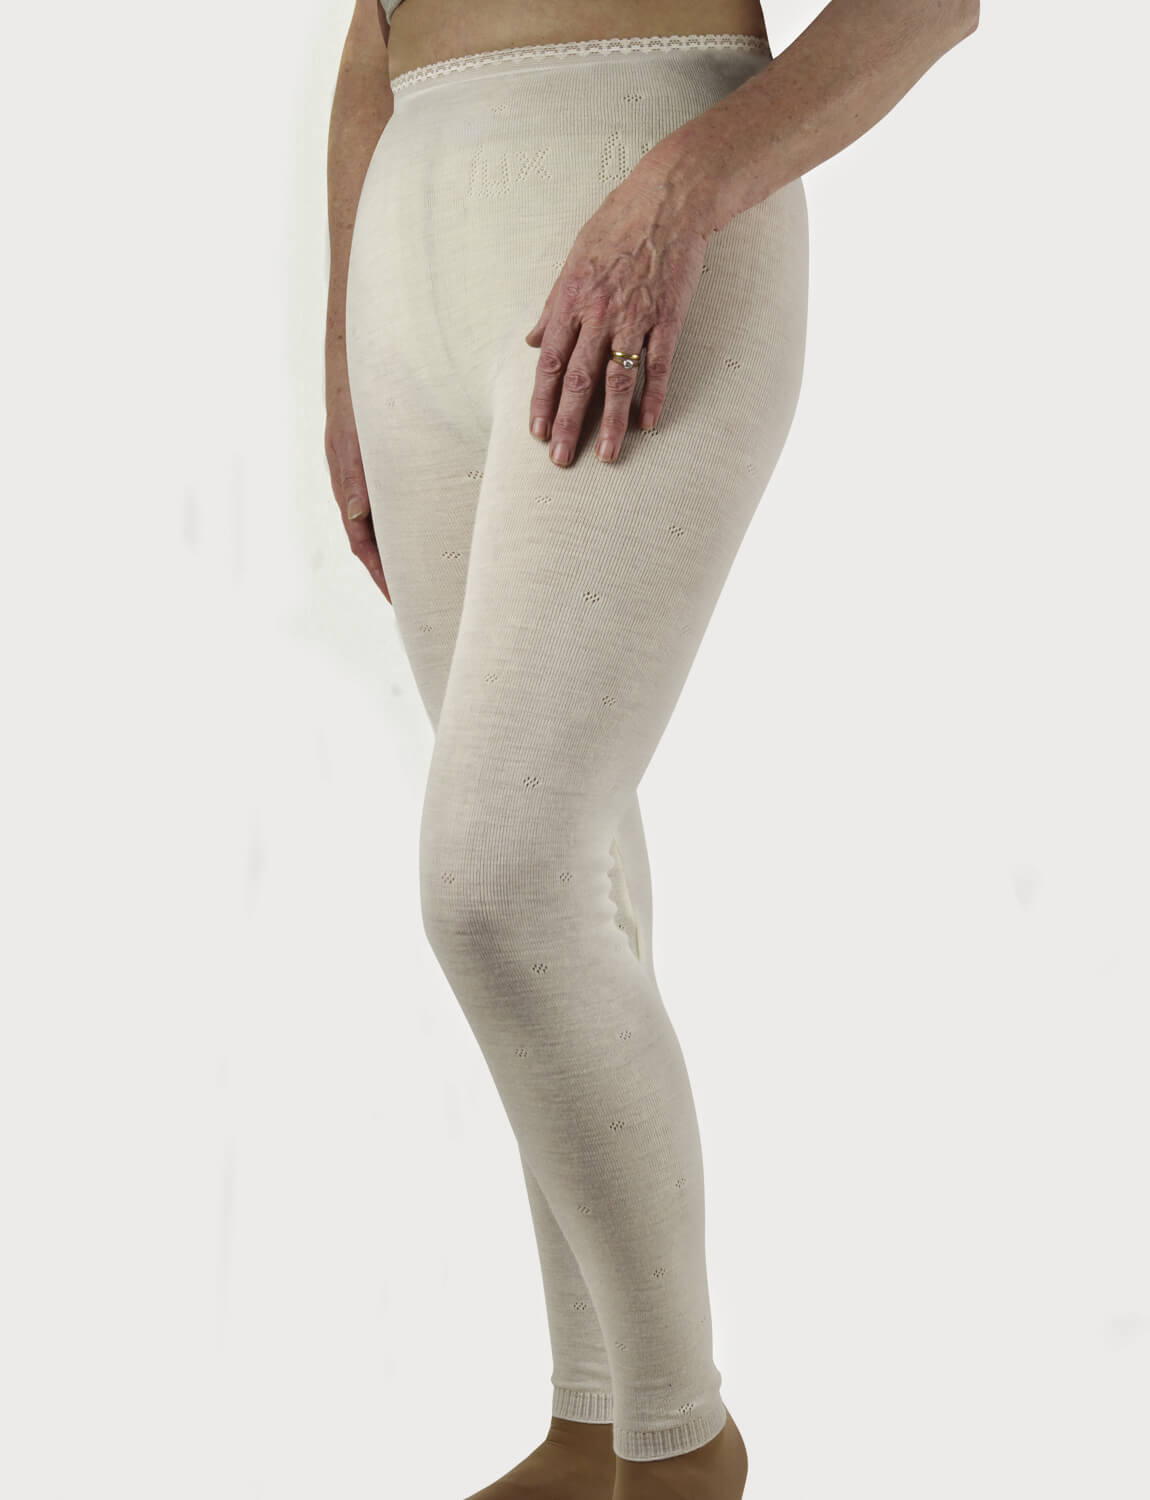 Long Johns, Brushed Thermal Underwear for Women